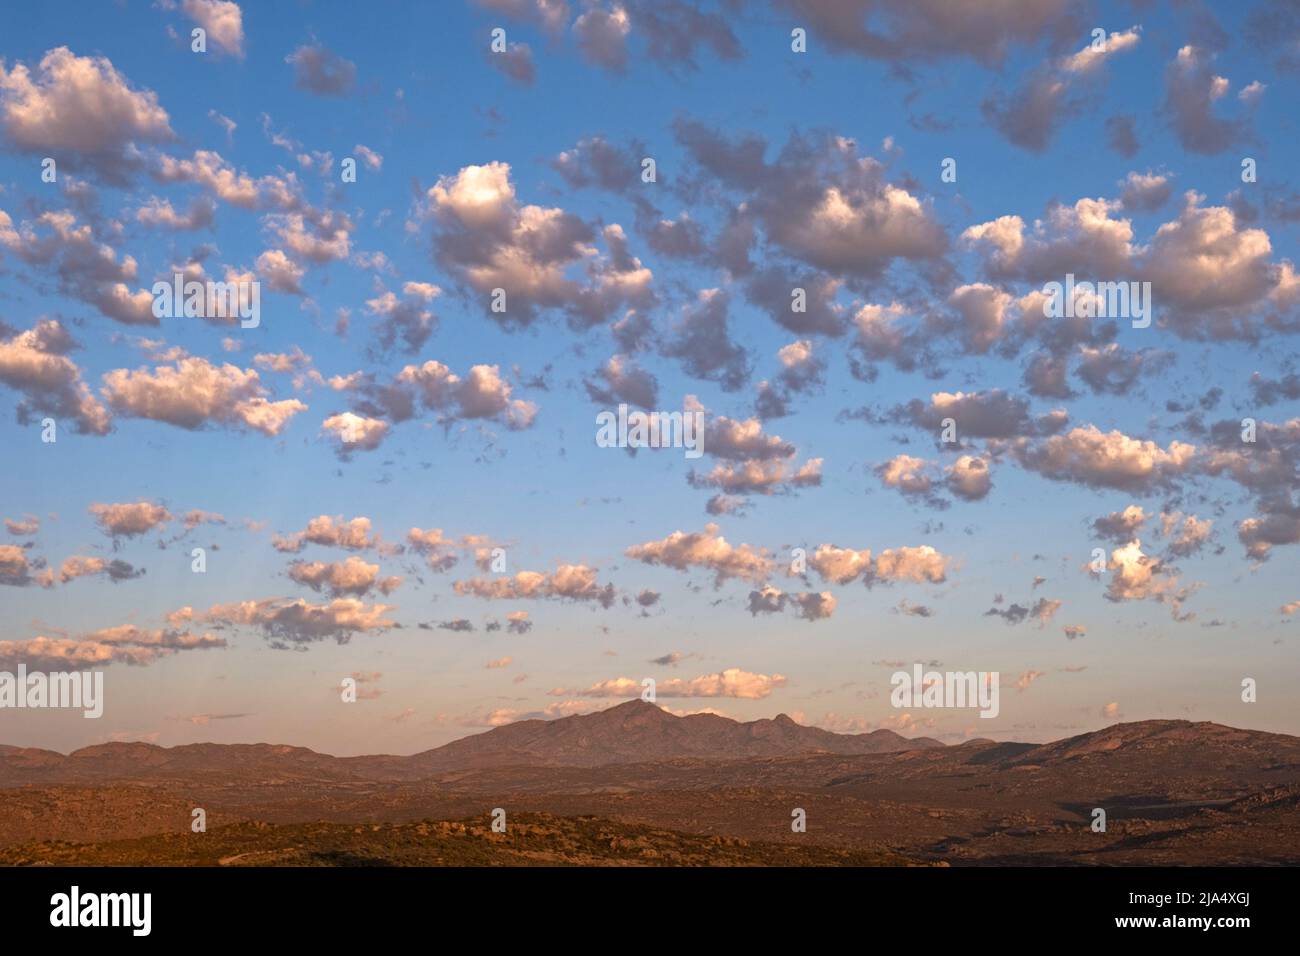 Altocumulus floccus clouds over semi-desert landscape at sunset in the Namaqua National Park, Namaqualand, Northern Cape, South Africa Stock Photo